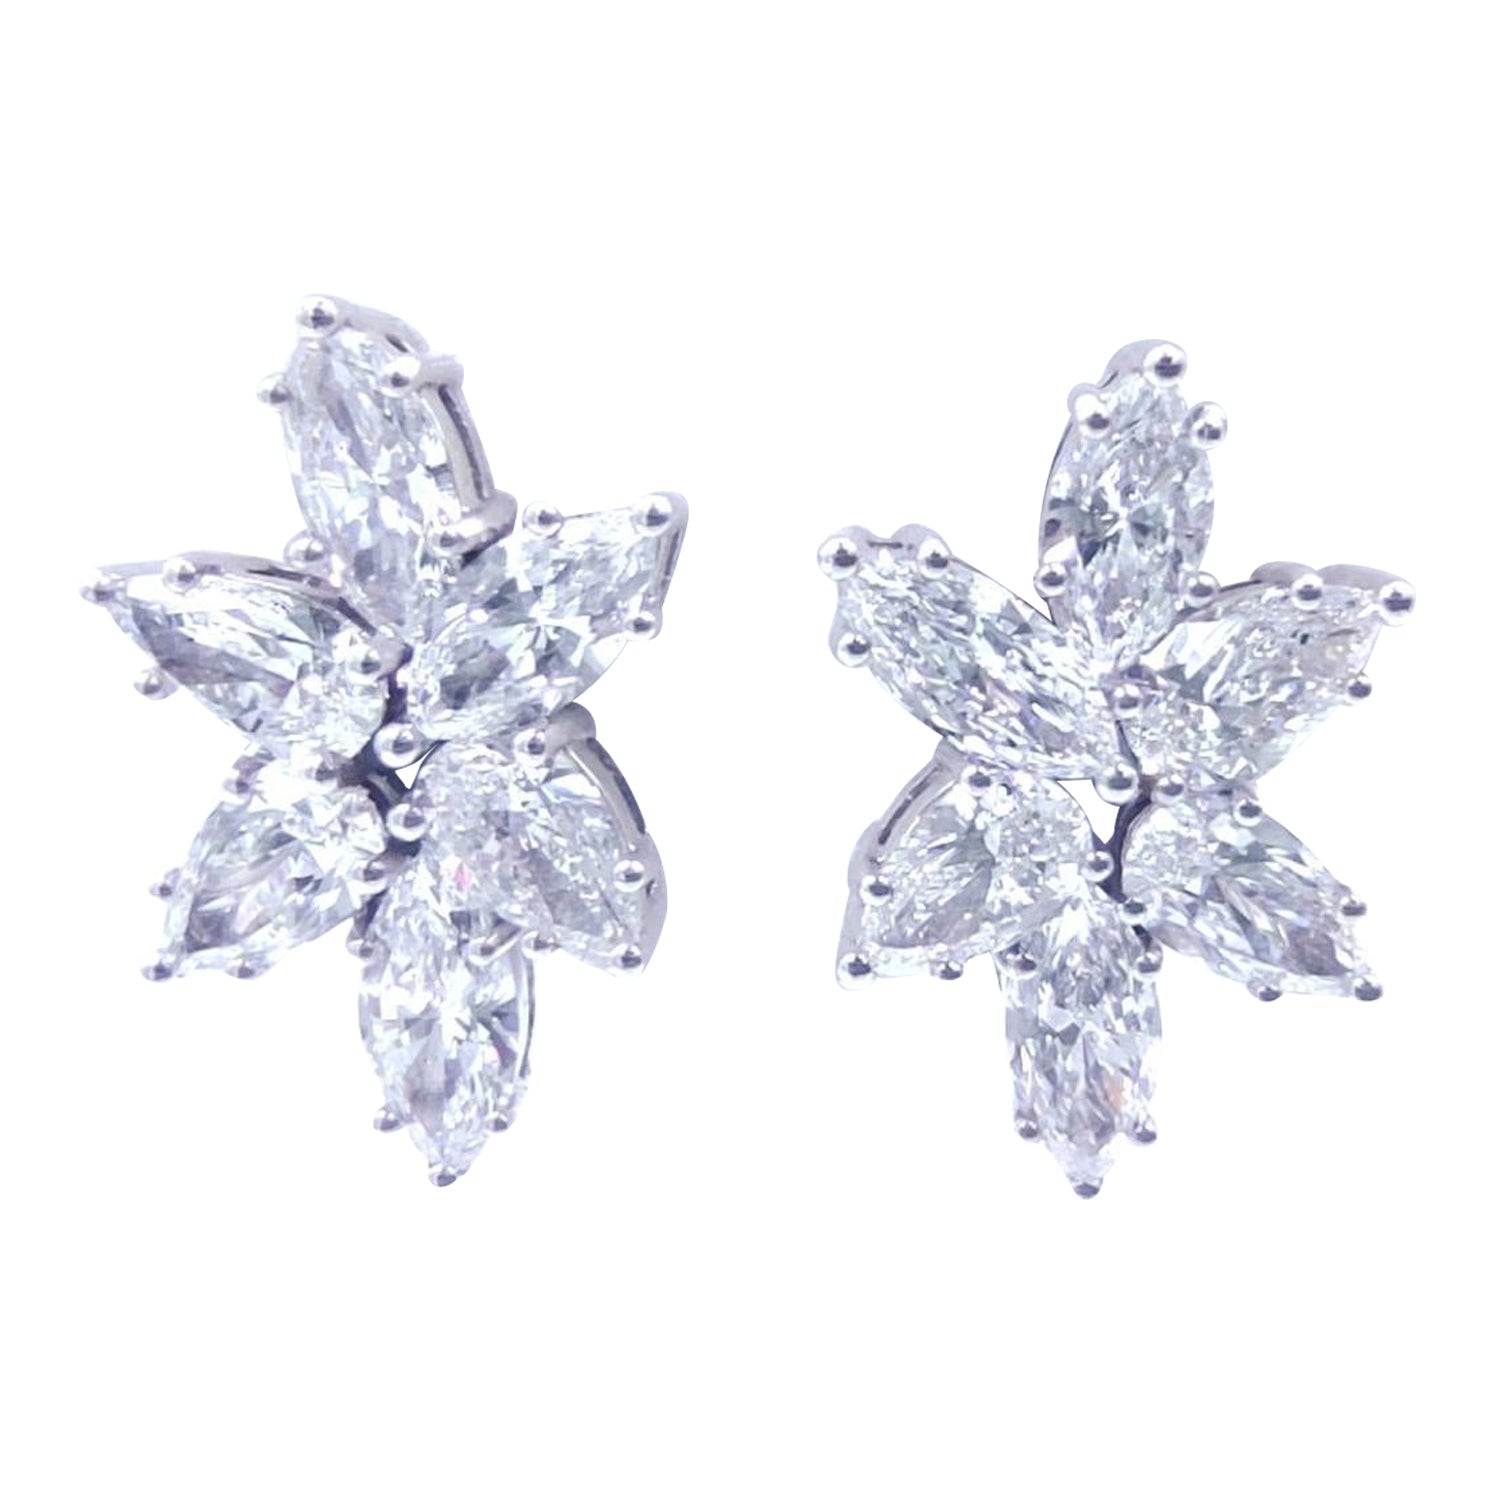 Behold the Original Antinori di Sanpietro Lever-Back Earrings, lovingly handcrafted in the heart of Italy. Crafted from the purest 18k white gold, these timeless jewels are adorned with a dazzling ensemble of 12 pear and marquise diamonds, each one